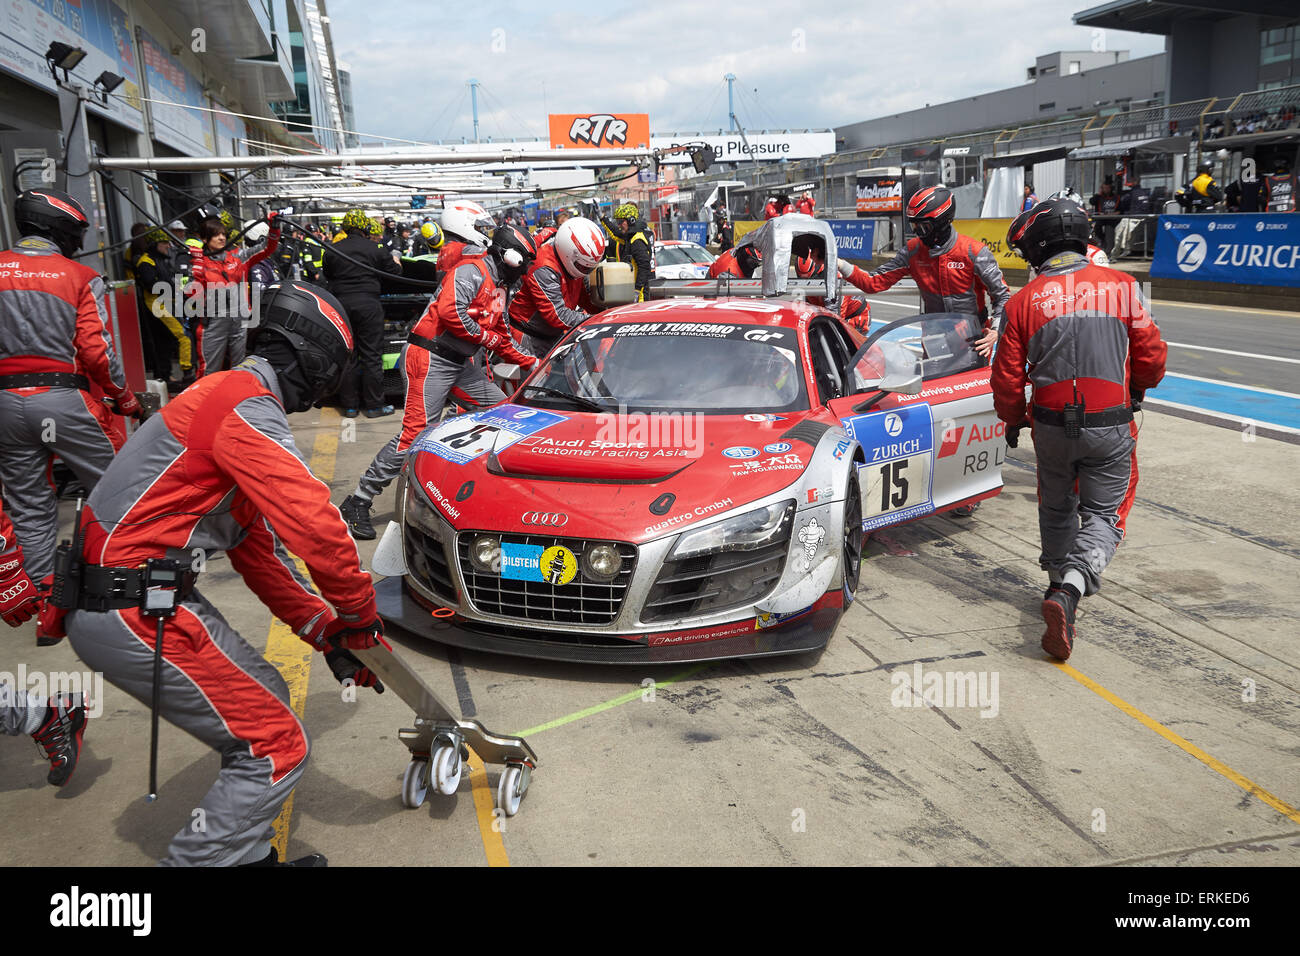 Audi R8 LMS, ADAC Zurich 24-hour race at the Nürburgring race track in 2015, Nürburg, Rhineland-Palatinate, Germany Stock Photo